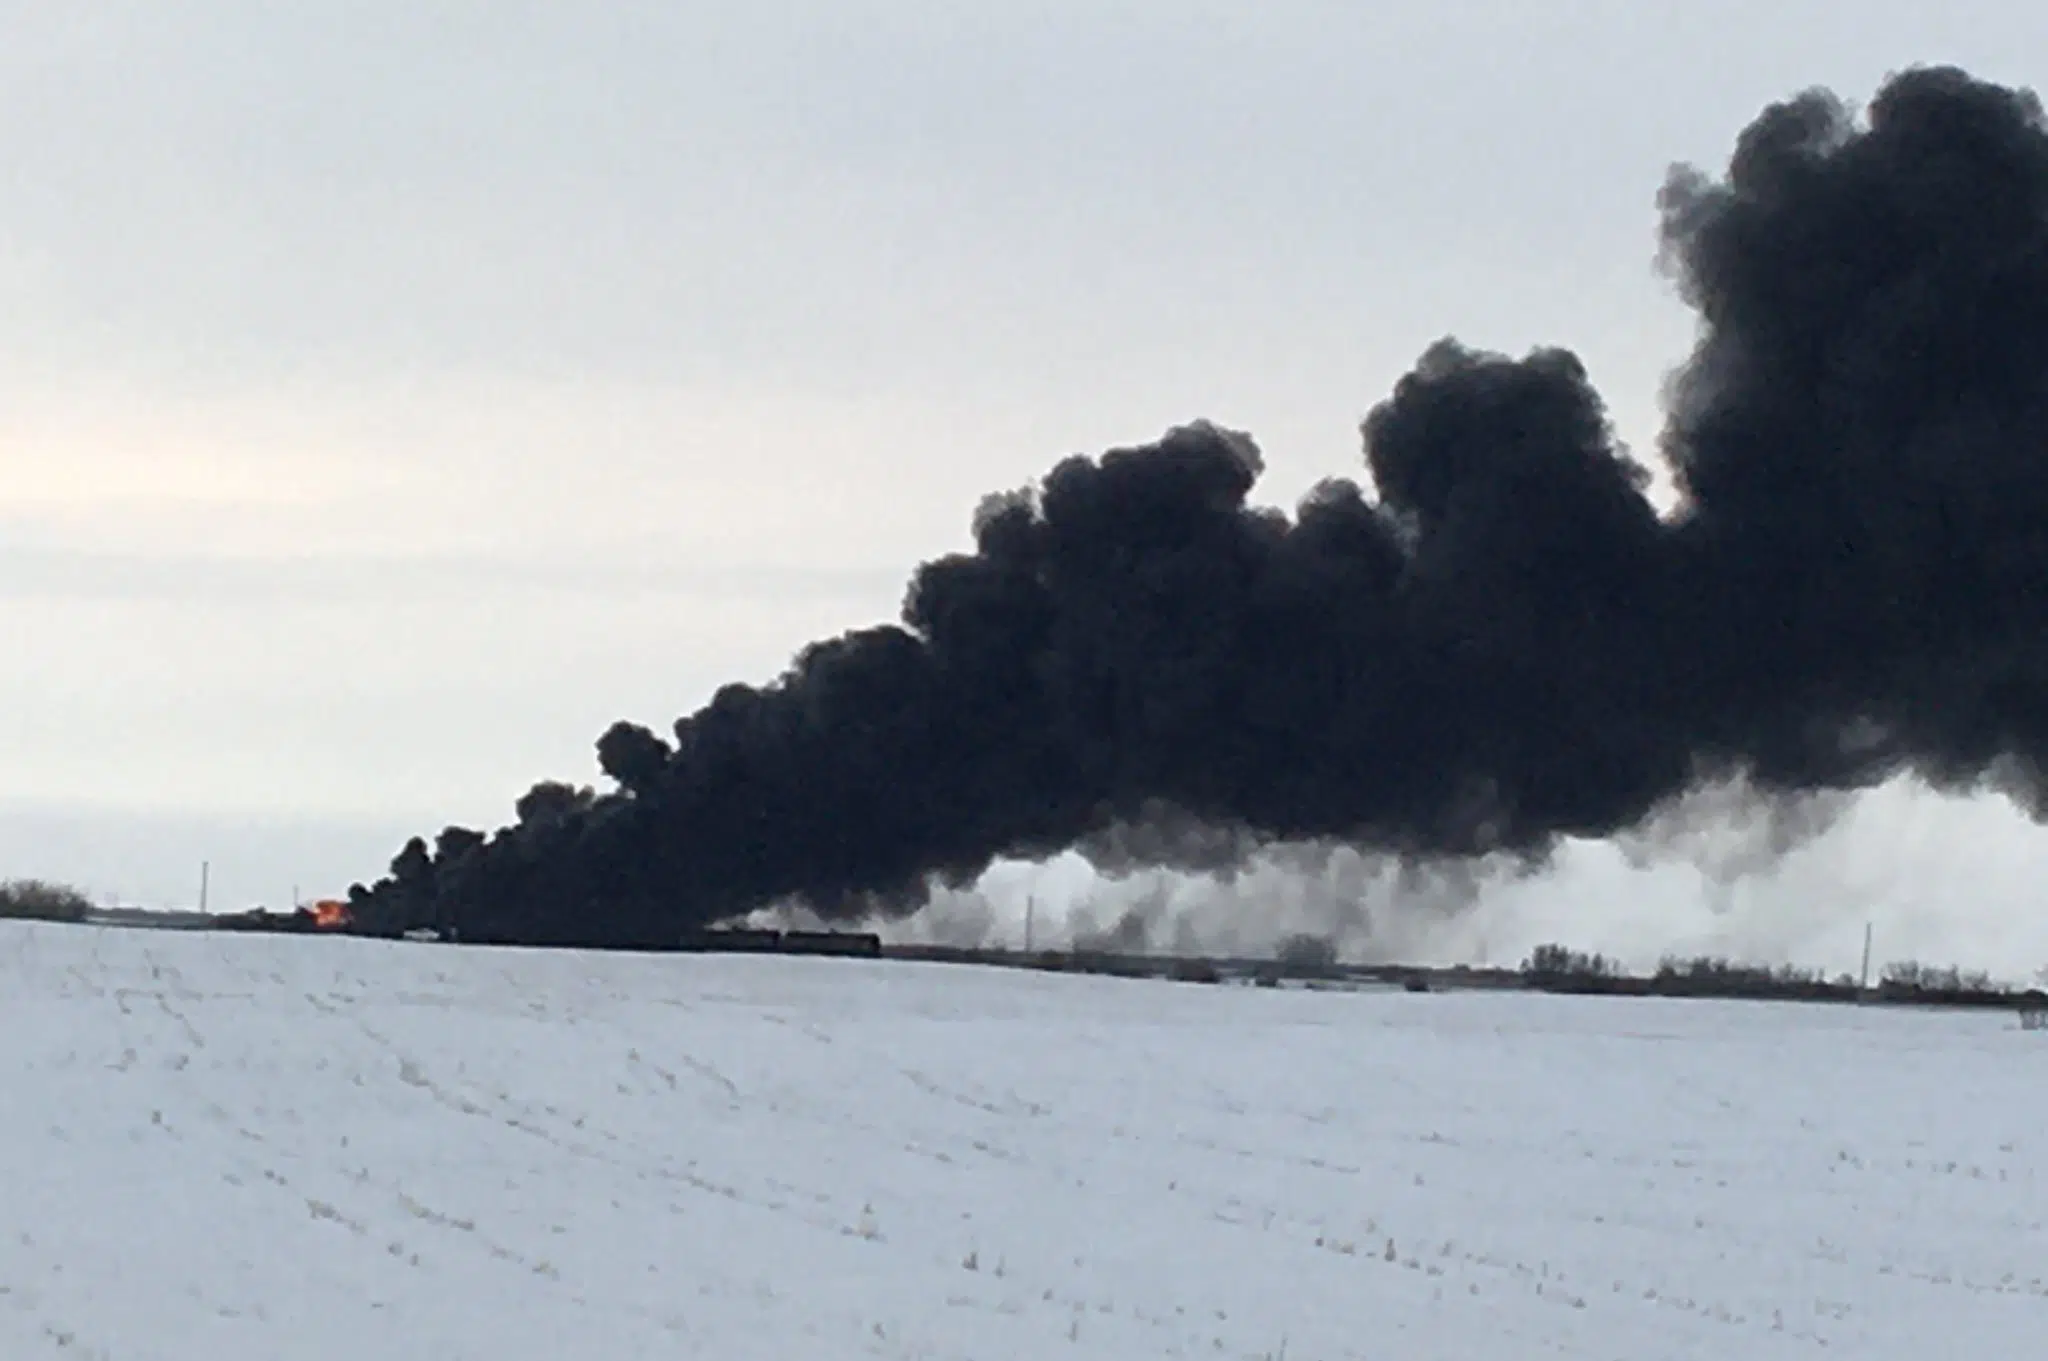 Guernsey looking for answers after multiple derailments, oil fires